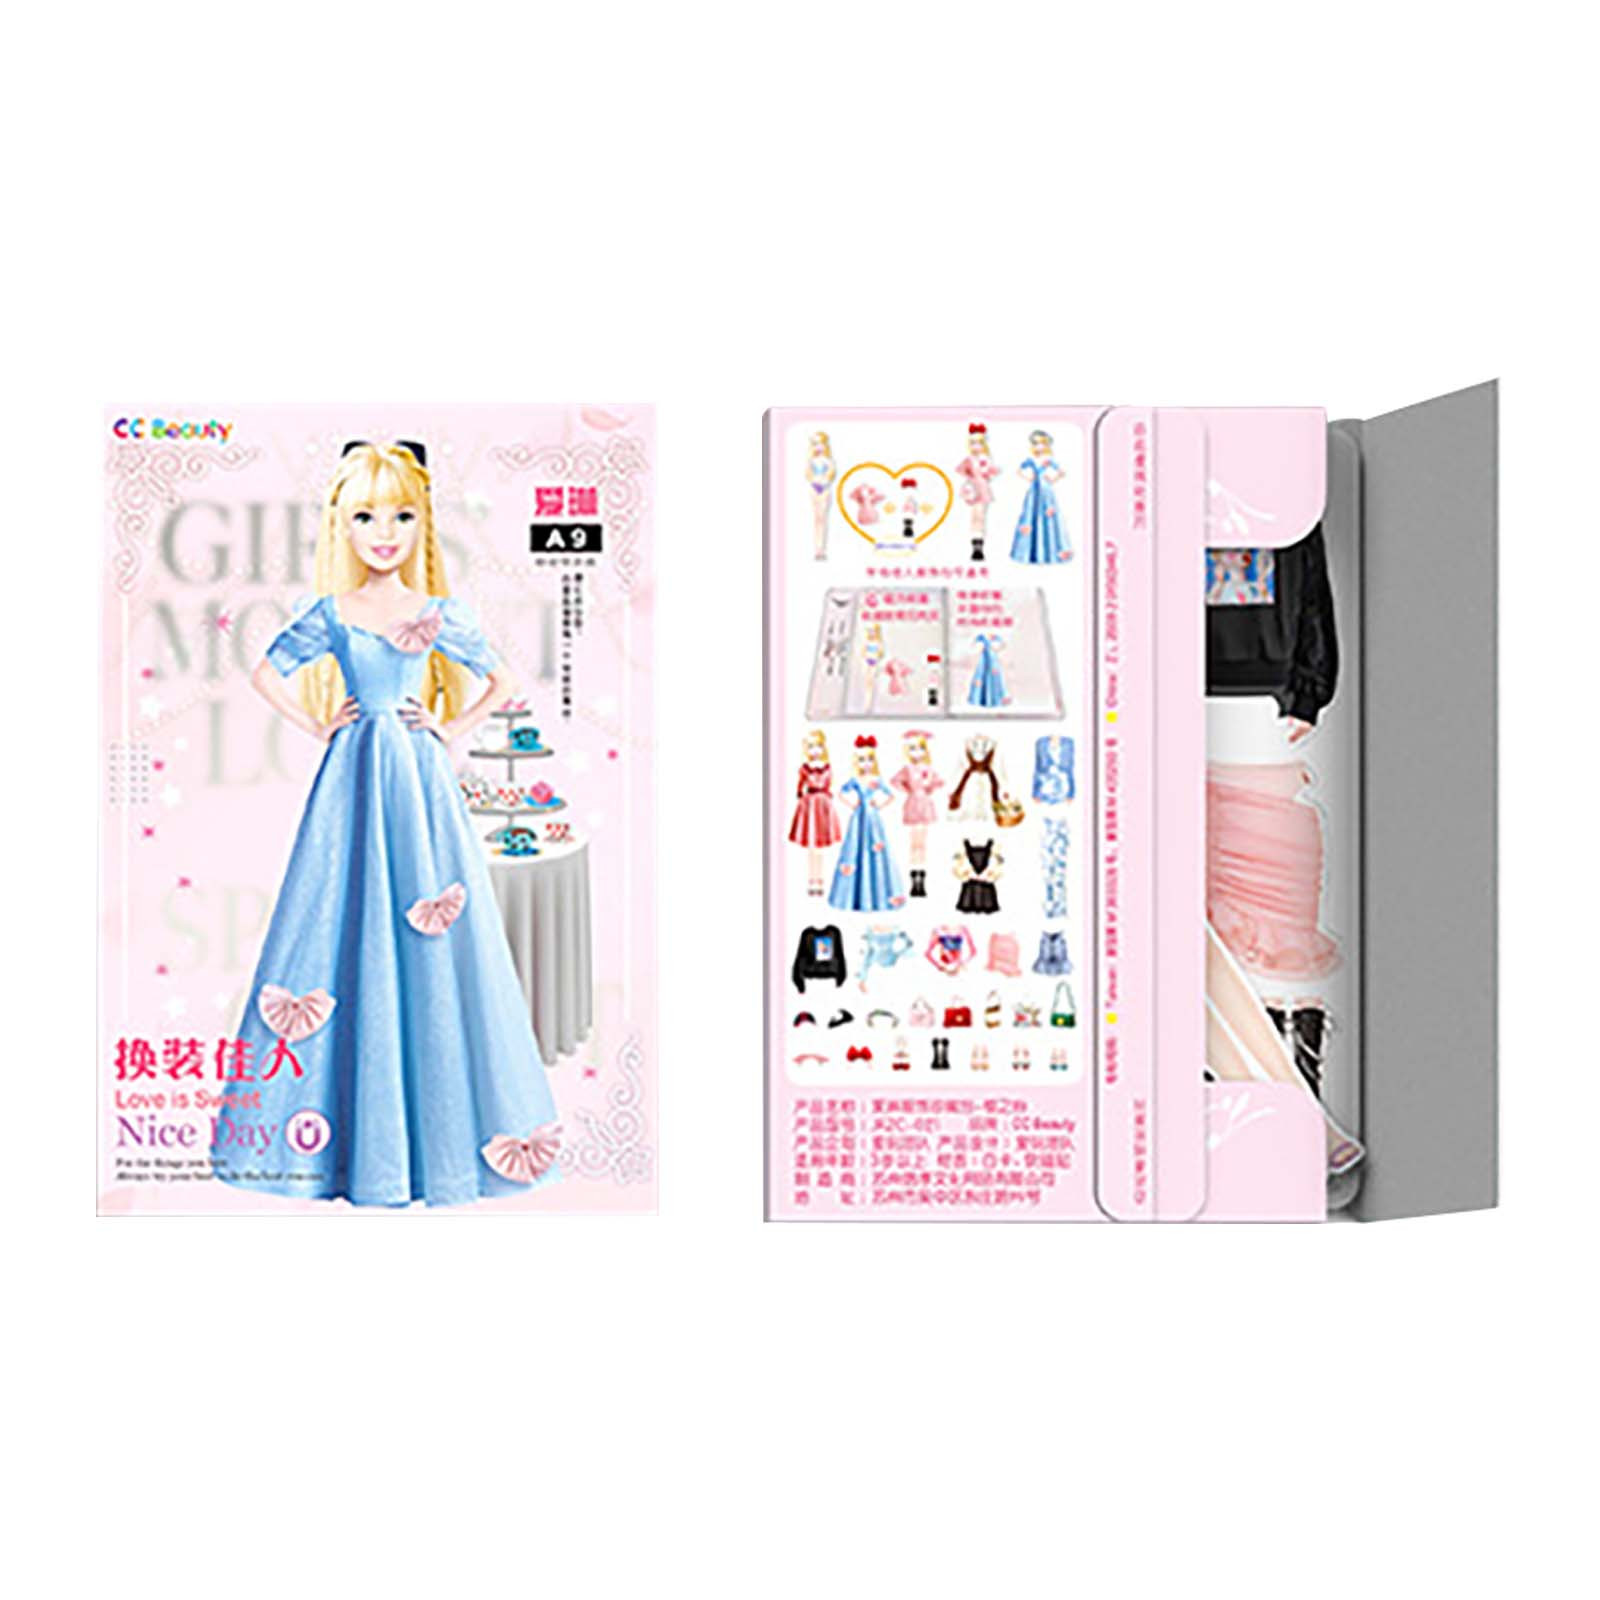 TUWABEII Games and Puzzles for Kids,Magnetic Dress Up Baby Magnetic Princess Dress Up Paper Doll Magnet Dress Up Pretend And Play Travel Playset Toy Magnetic Dress Up Dolls For Girls Kid's Gift - image 4 of 7